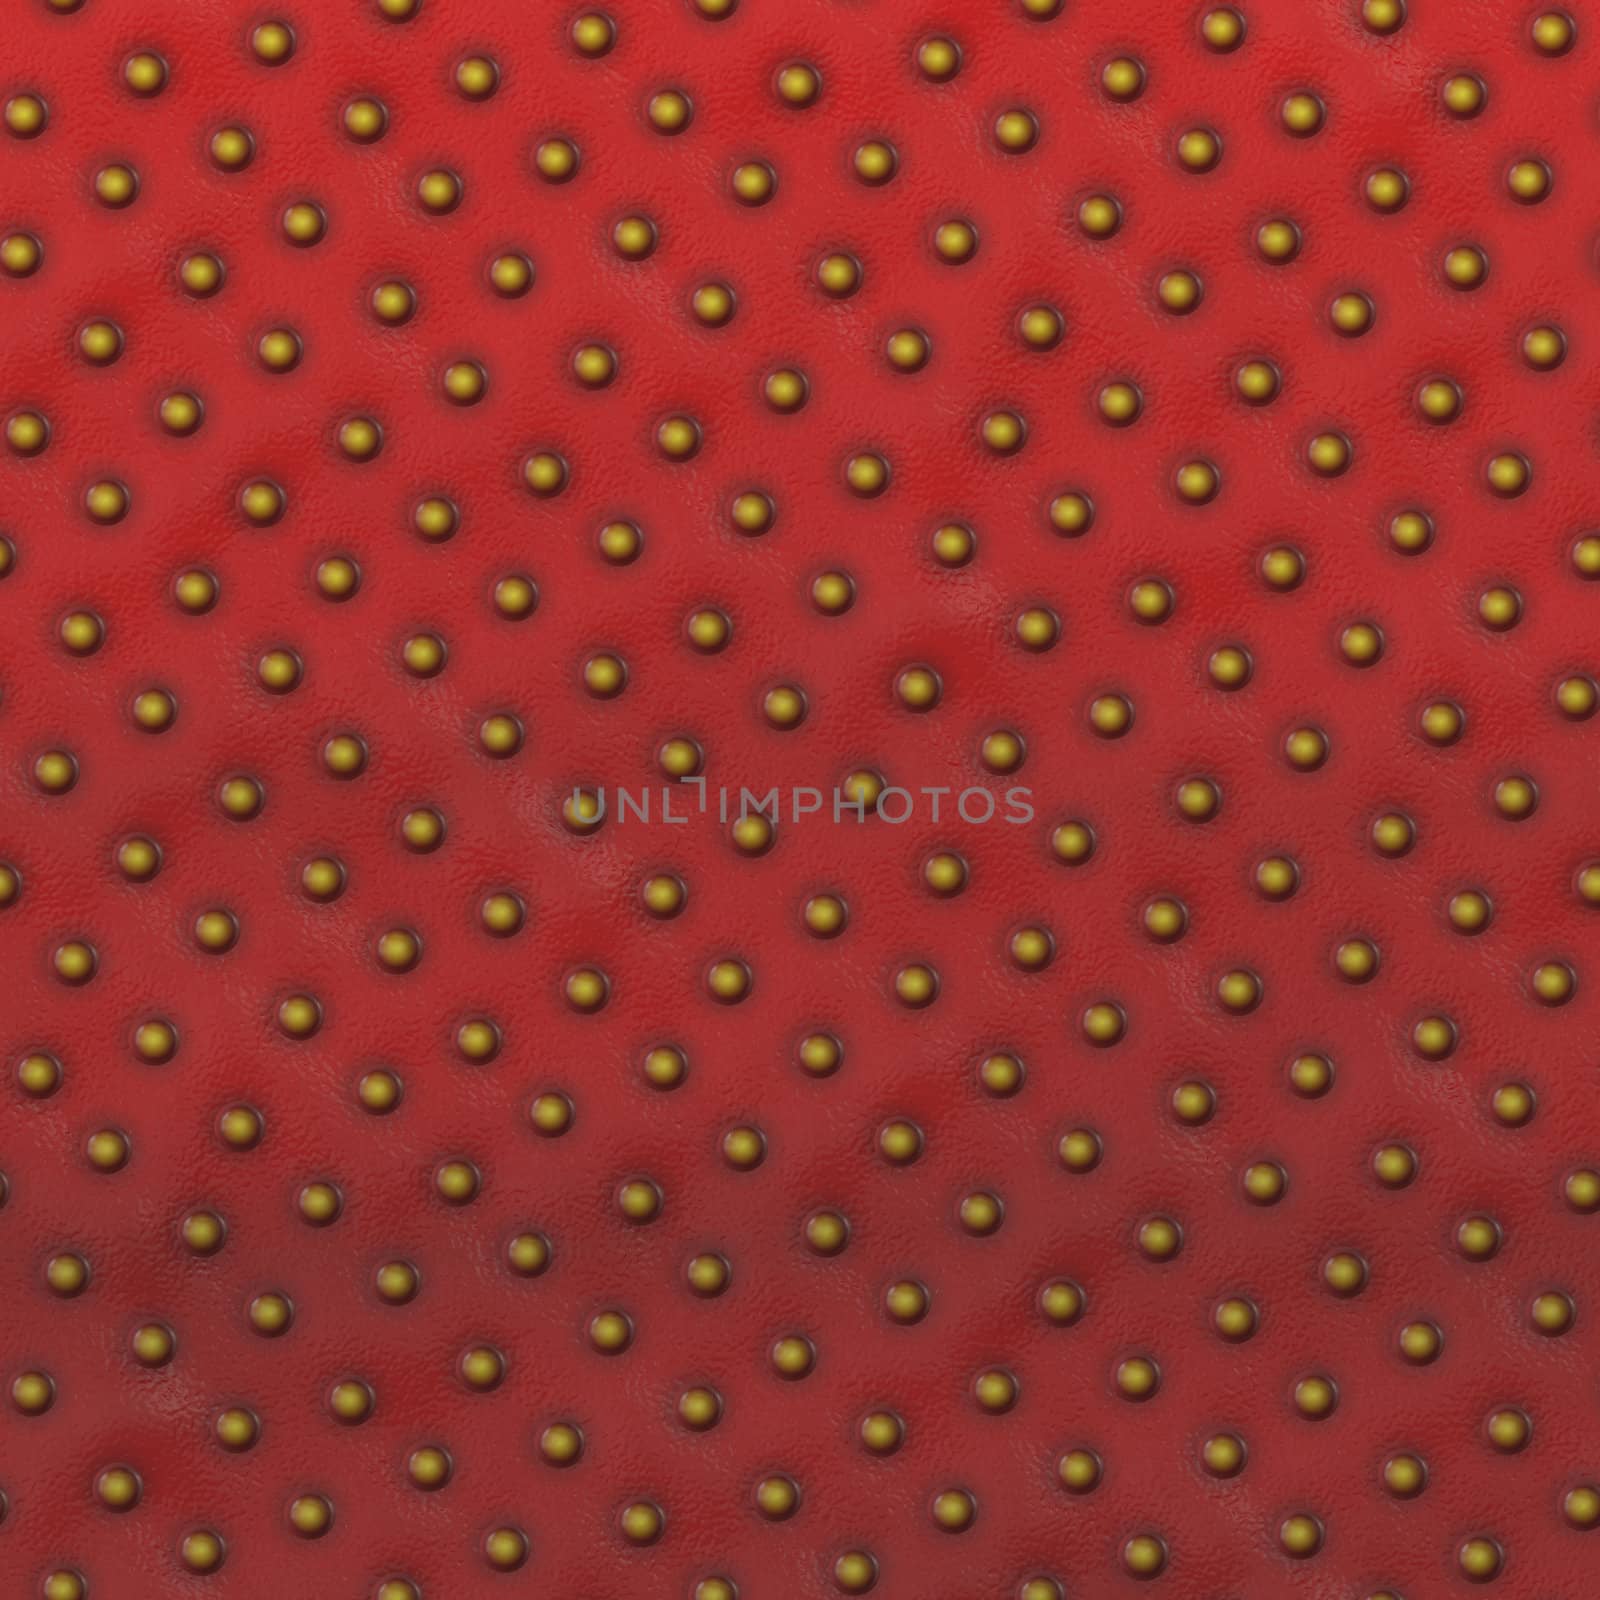 photorealistic render of strawberry texture for background

